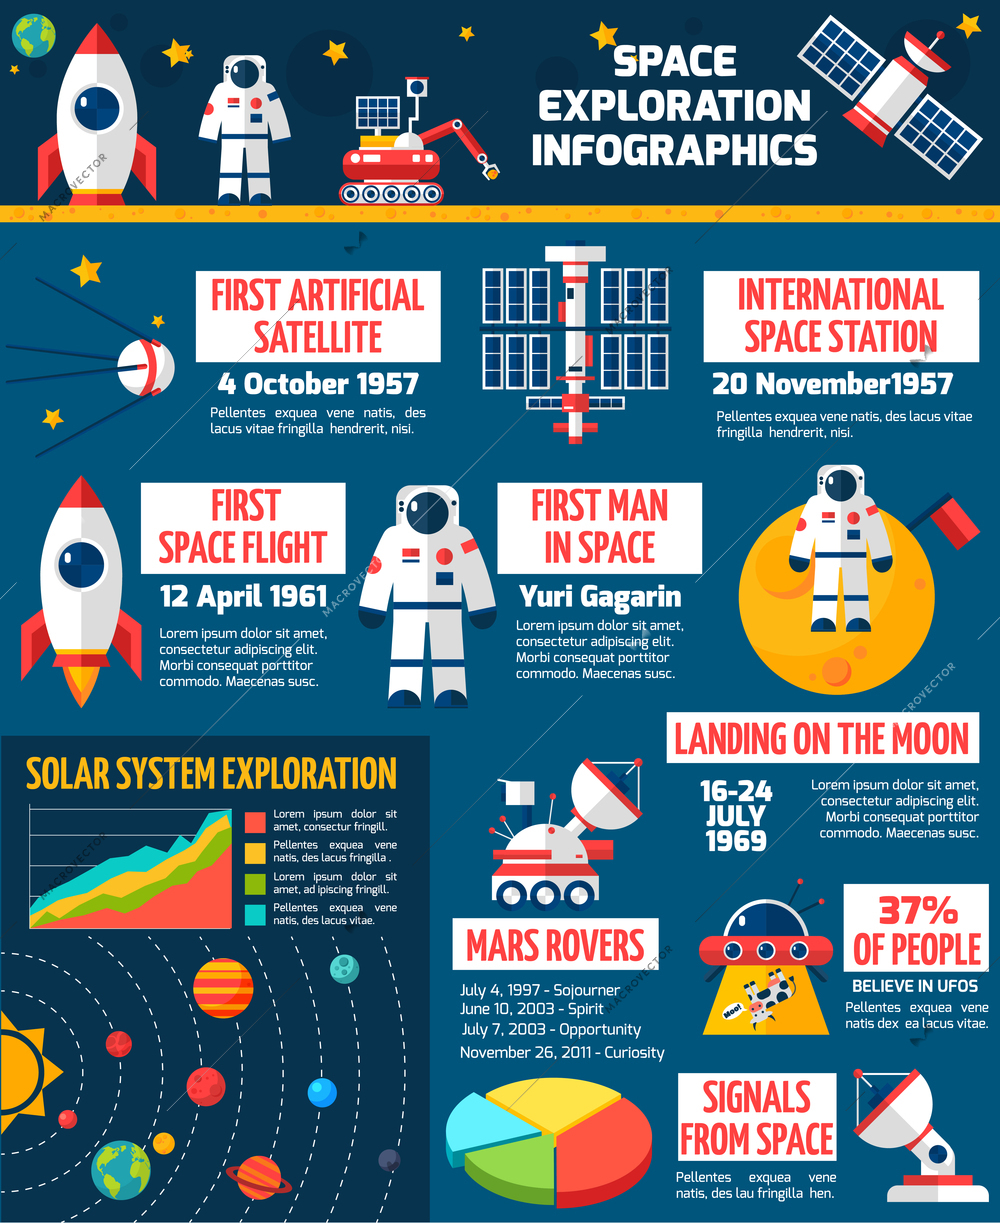 Space exploration timeline infographic layout poster with historical dates of spacecrafts launches and  technological achievements vector illustration